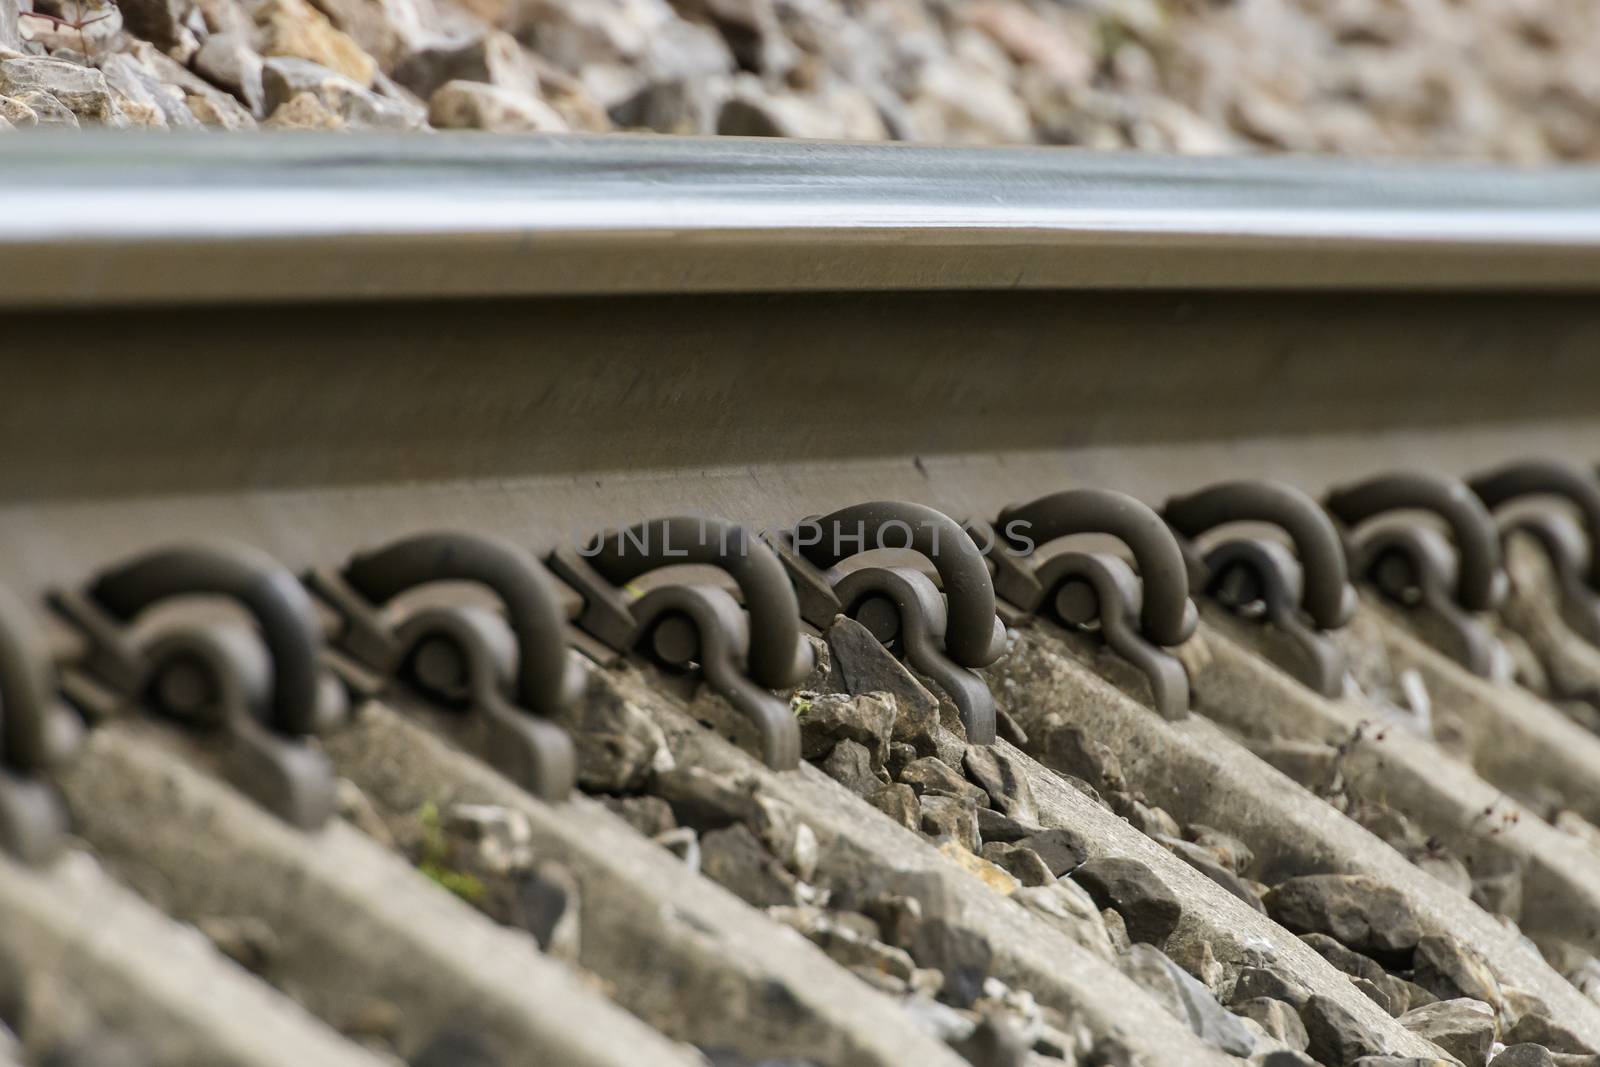 Detailed close up photo of a railroad track